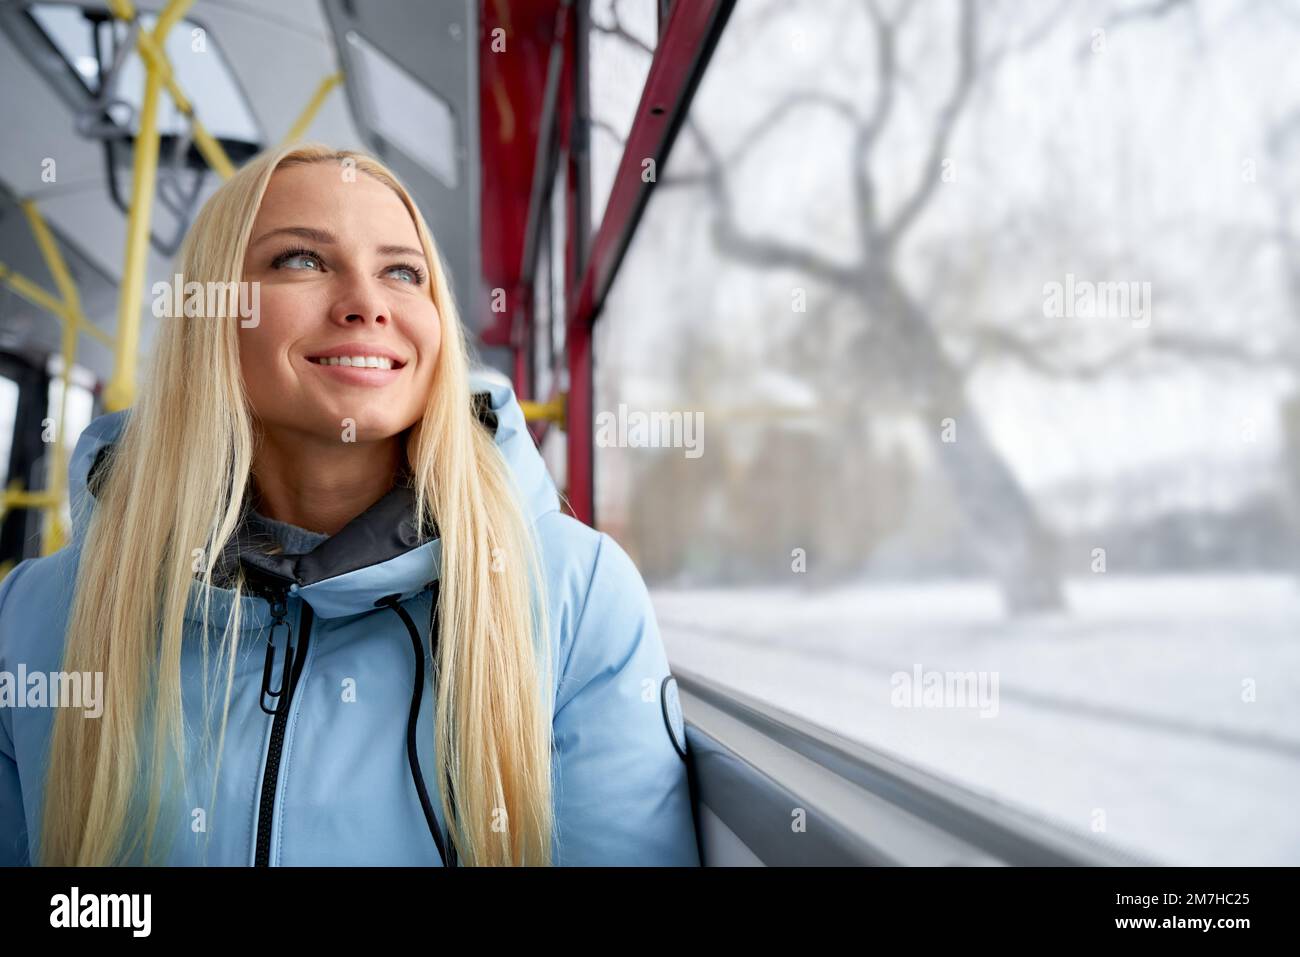 Front view of pretty, blonde woman with long hair sitting on bus, waiting, looking through window. Young female smiling, traveling by public transport. Concept of modern lifestyle. Stock Photo